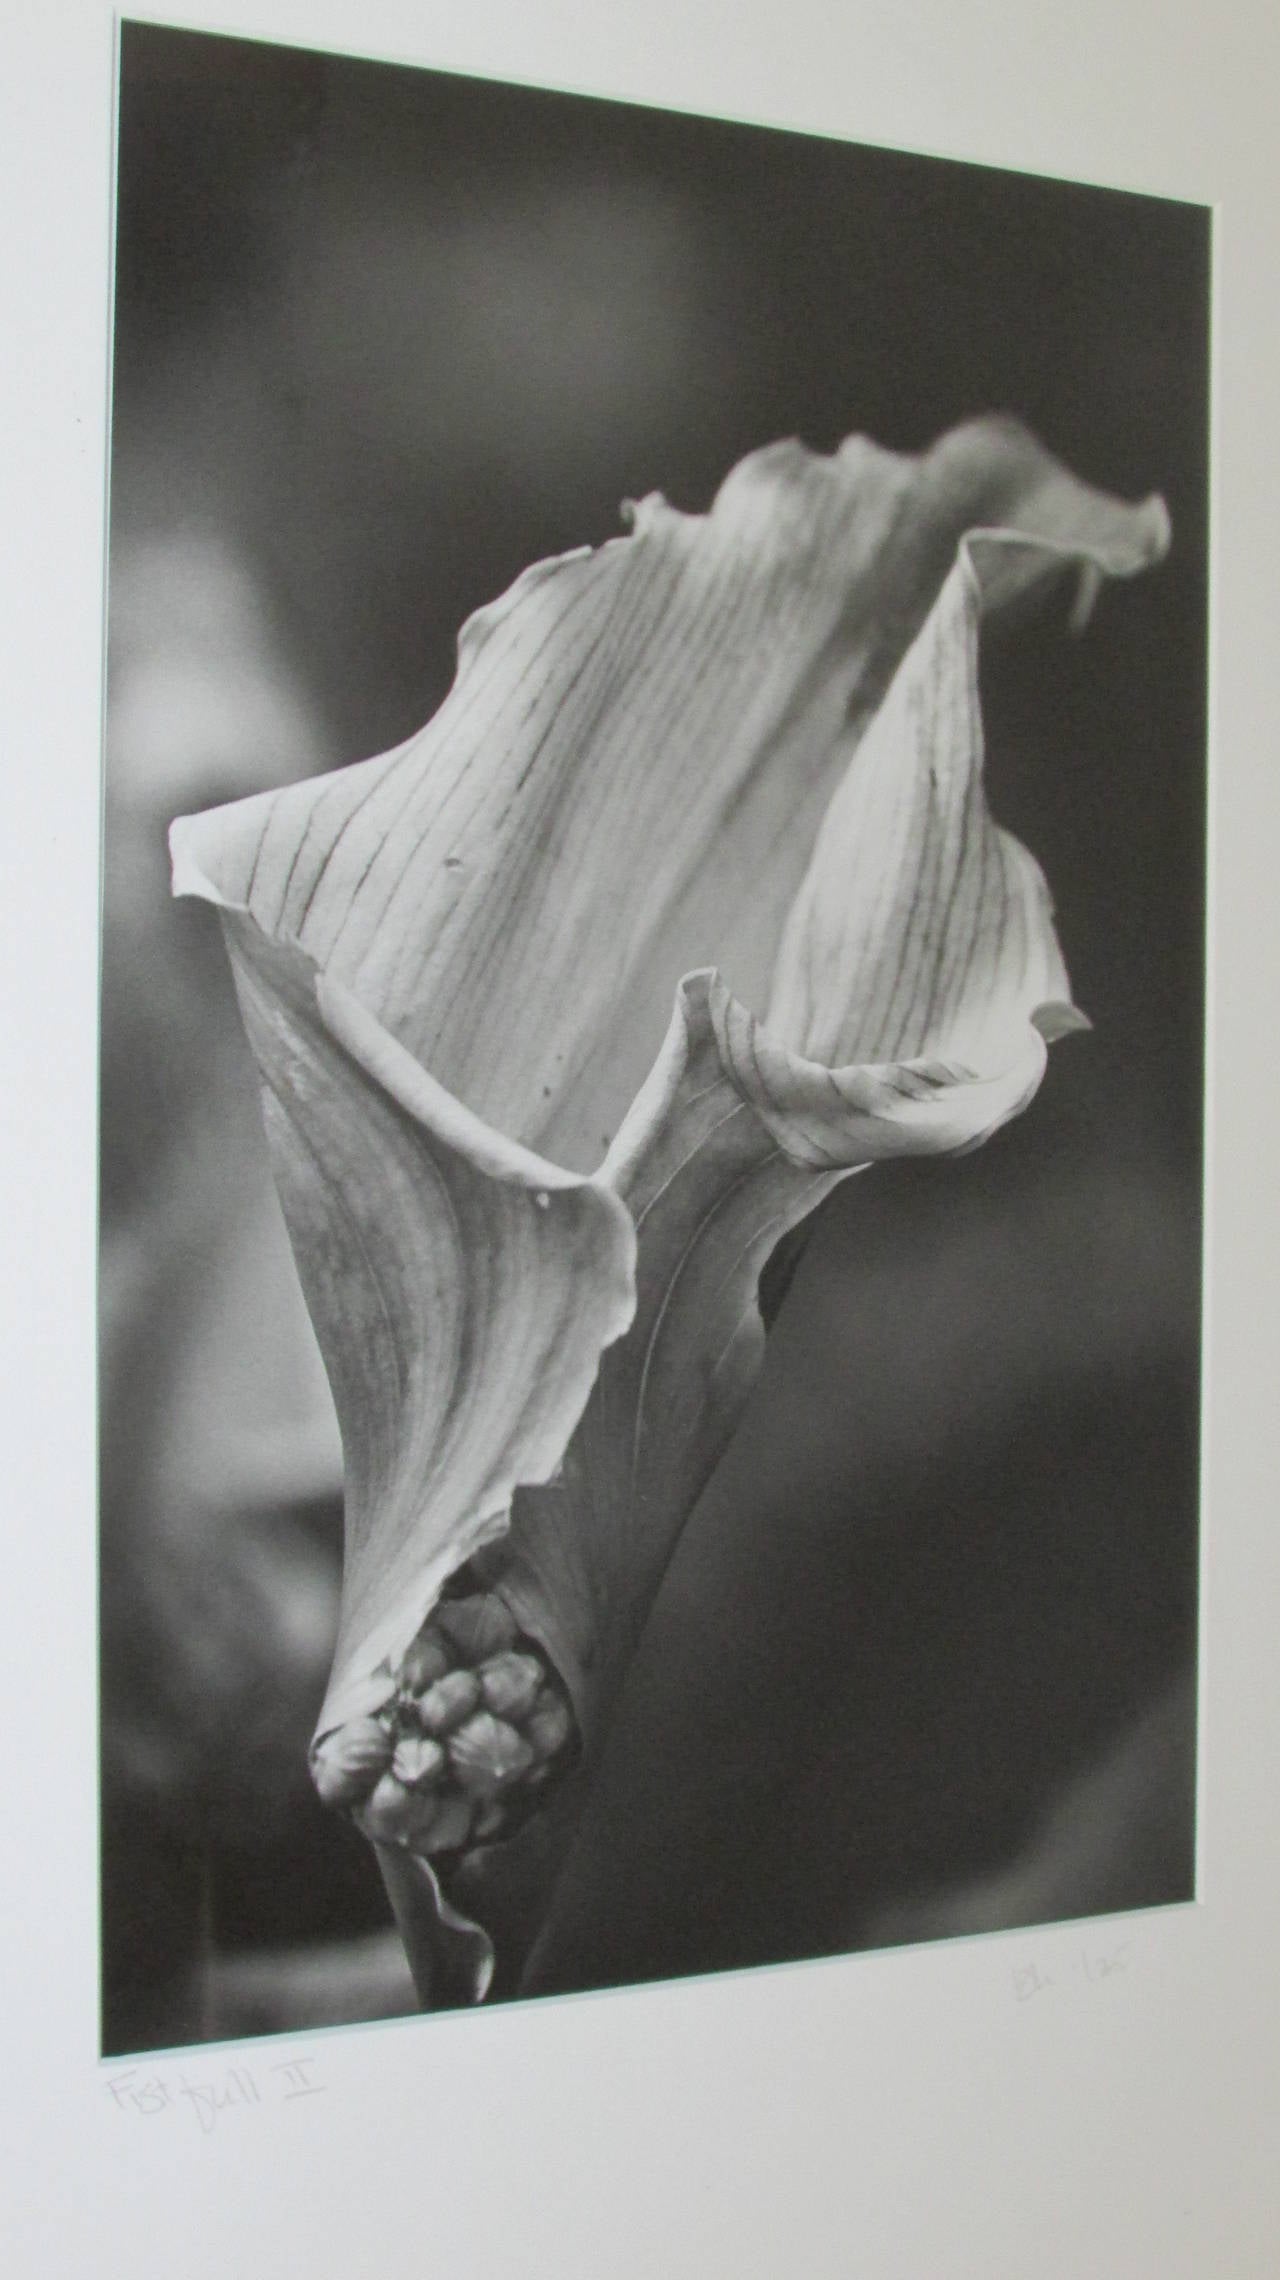 20th Century Erotic Flora & Fauna Photographs in the Style of Robert Mapplethorpe